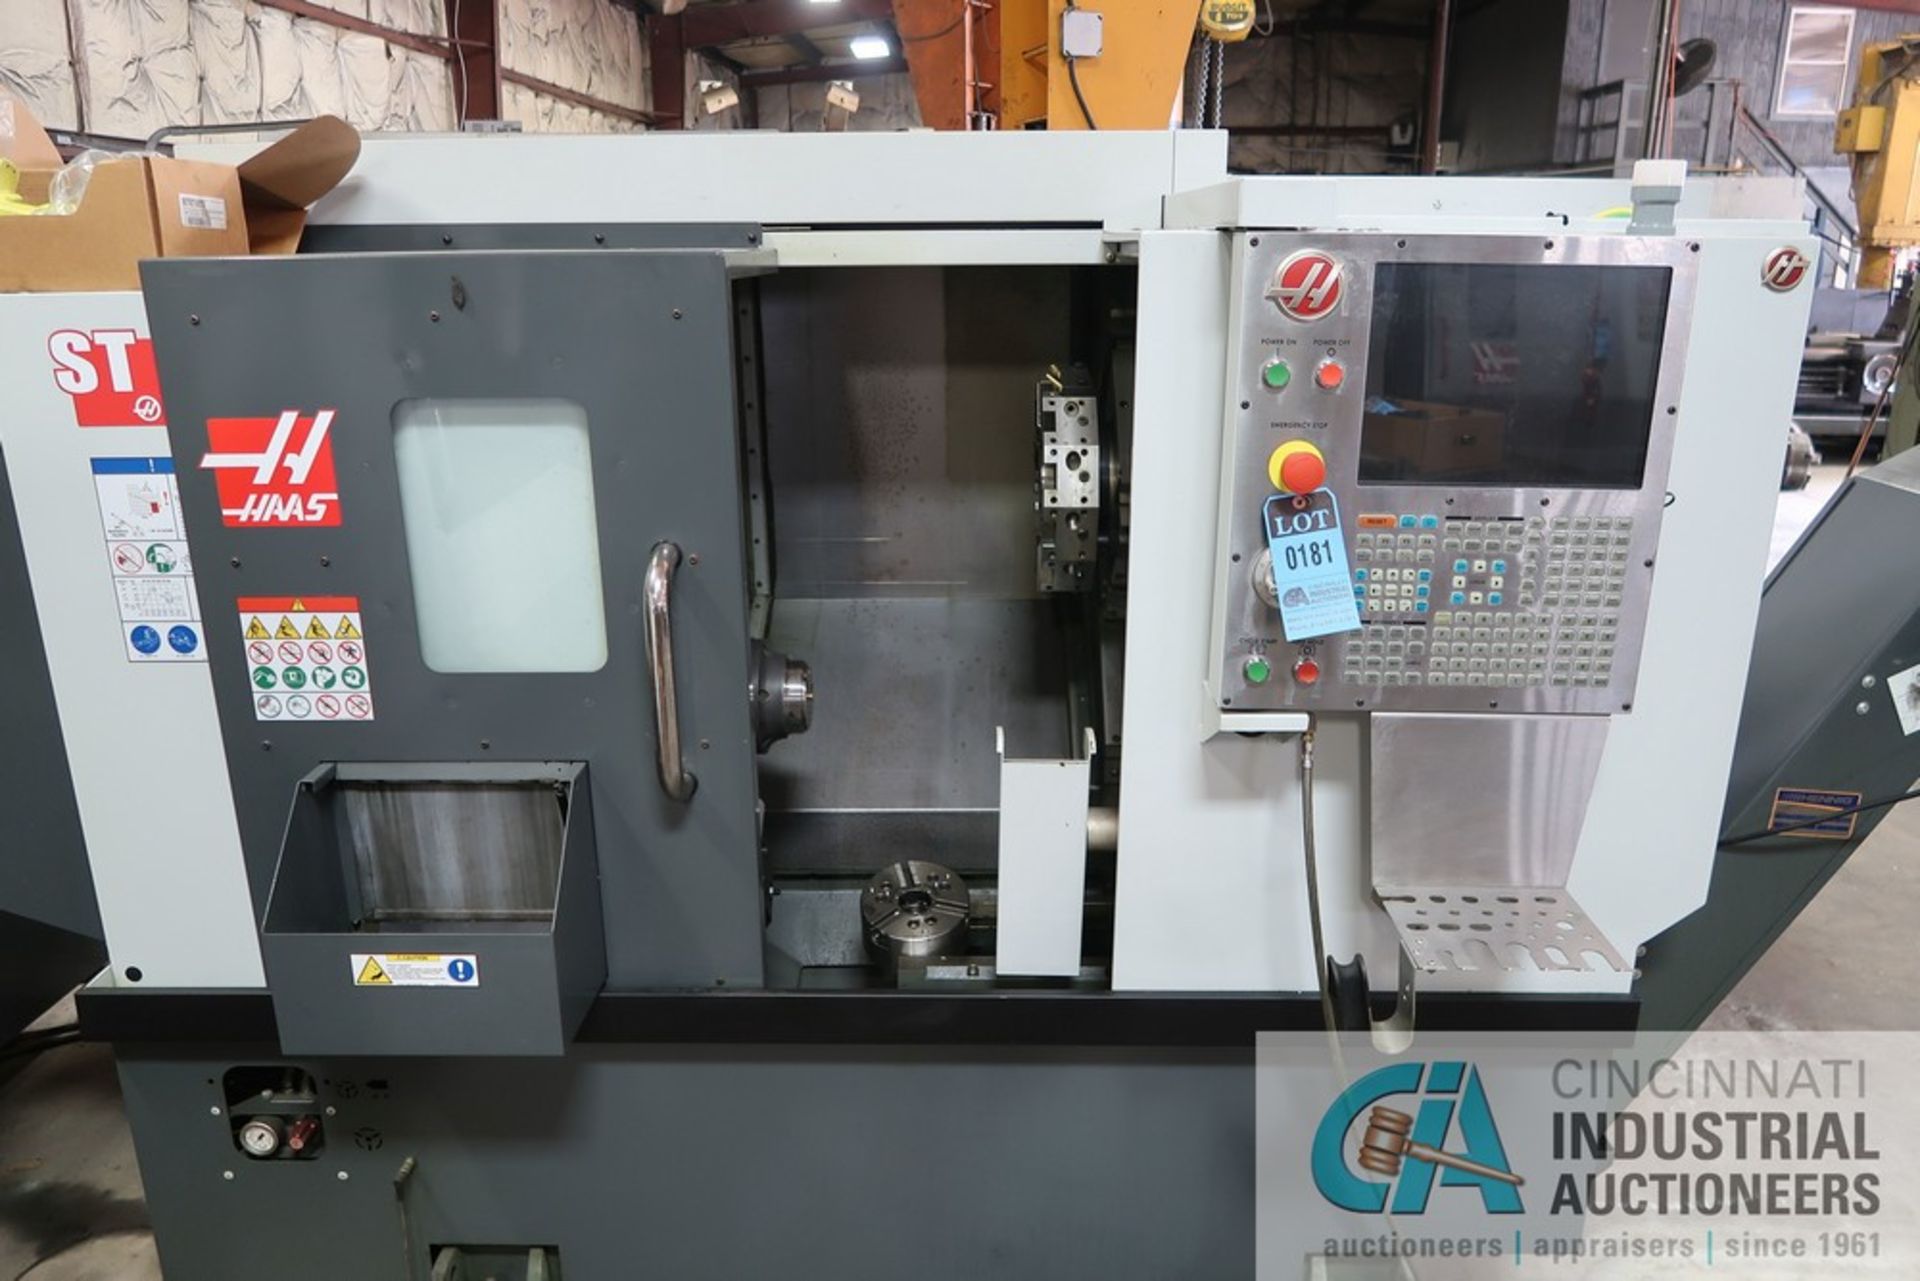 HAAS MODEL ST10 CNC TURNING CENTER; S/N 3108101, COLLET CHUCK, 12-POSITION TURRET, TOOL PRESETTER, - Image 2 of 10